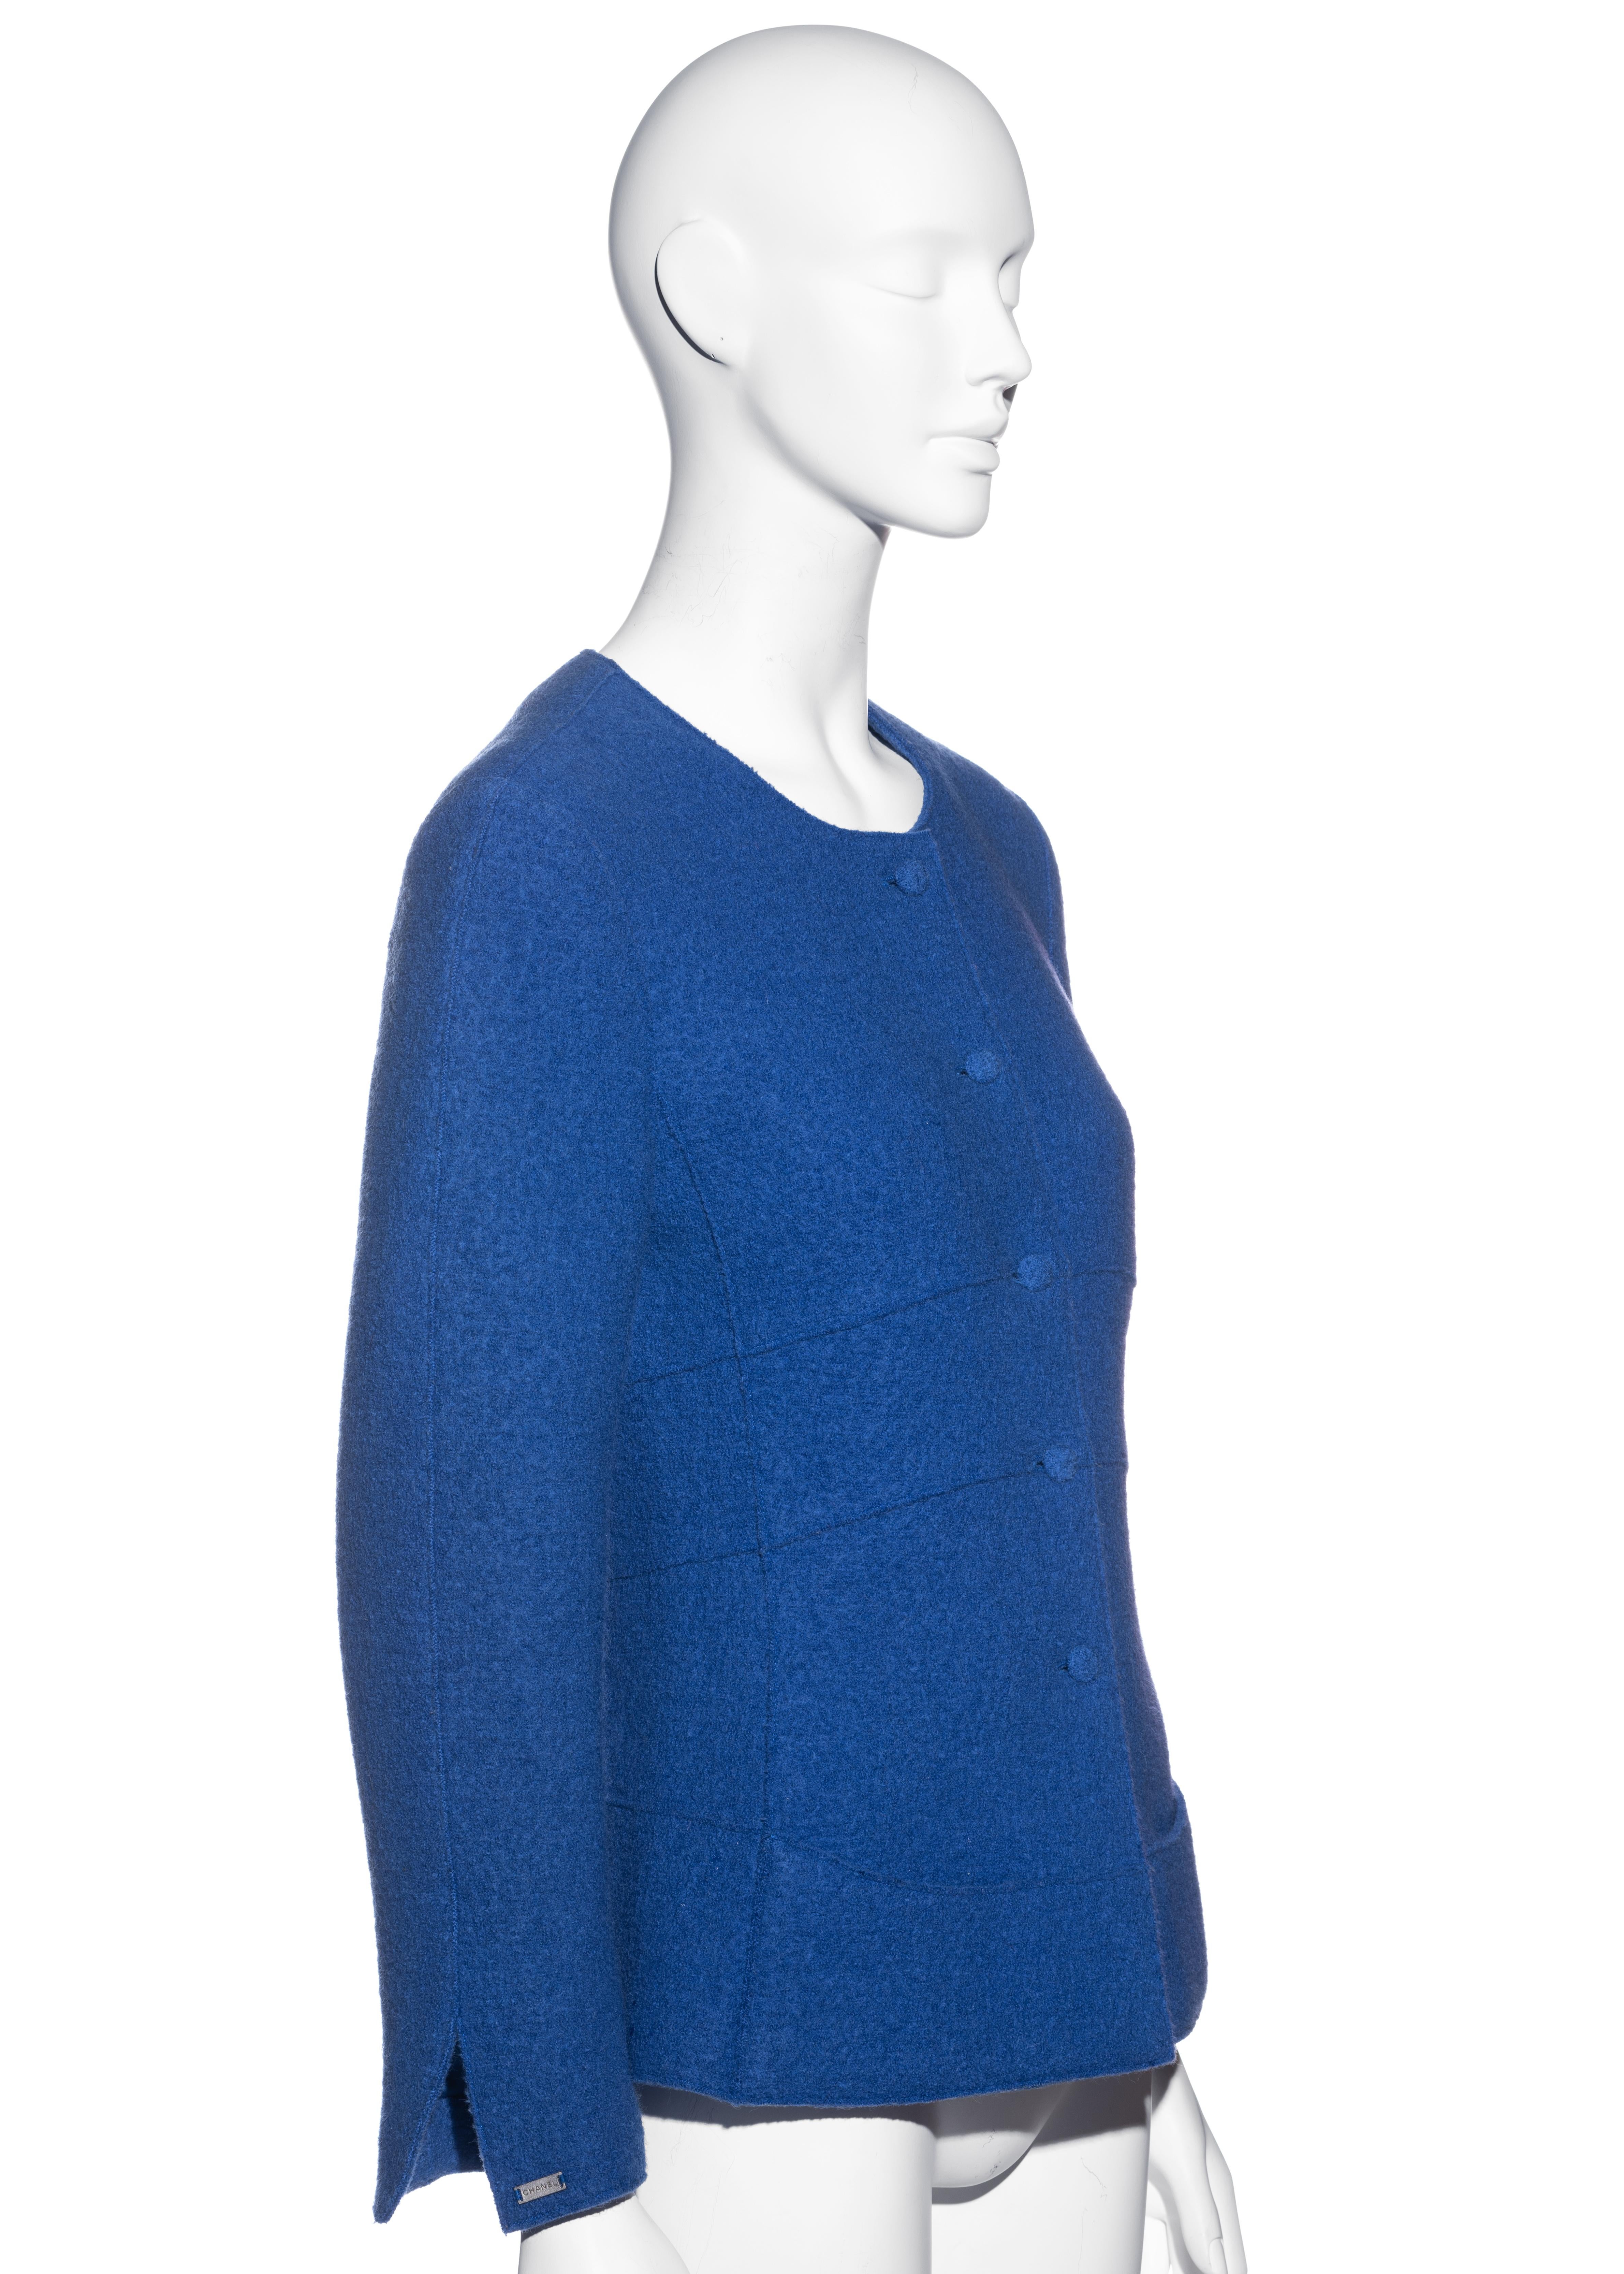 Chanel by Karl Lagerfeld blue boiled wool fitted jacket, fw 1999 1